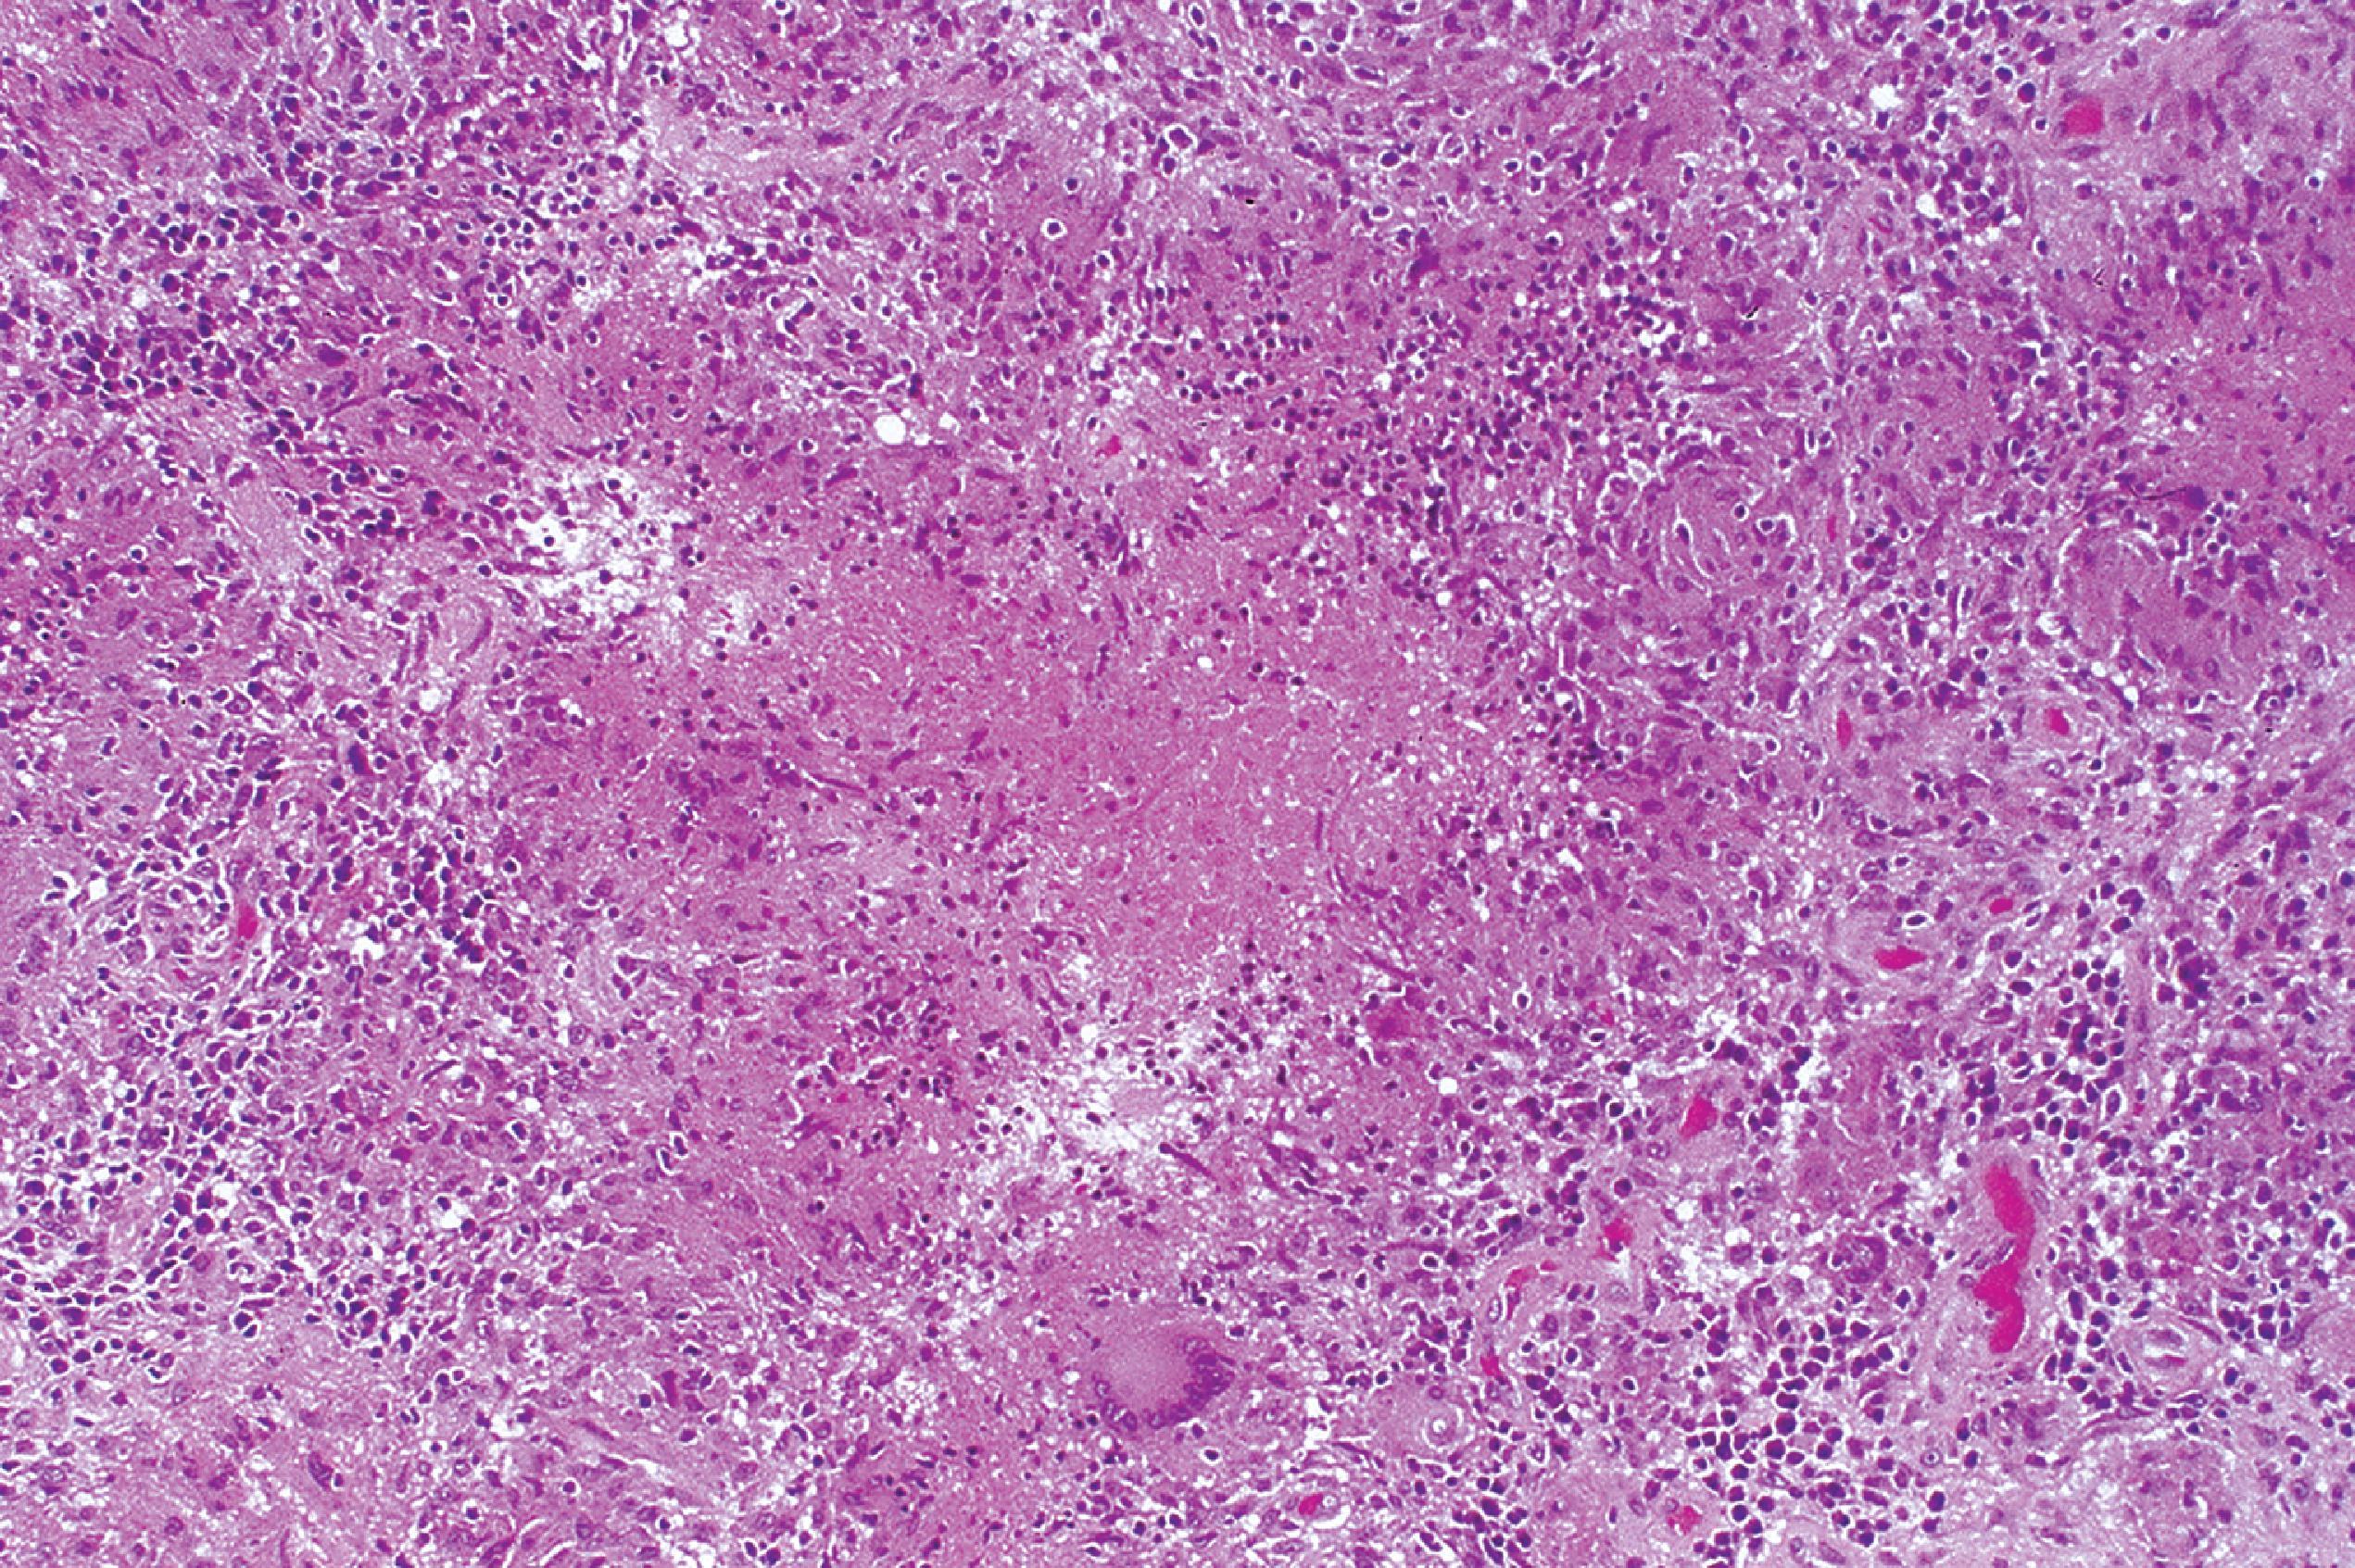 FIGURE 7.9, Tuberculosis. Necrotizing granulomatous inflammation is typical of this infection. Areas of central caseous necrosis are surrounded by an inflammatory infiltrate composed of epithelioid histiocytes, Langhans giant cells, and lymphocytes.